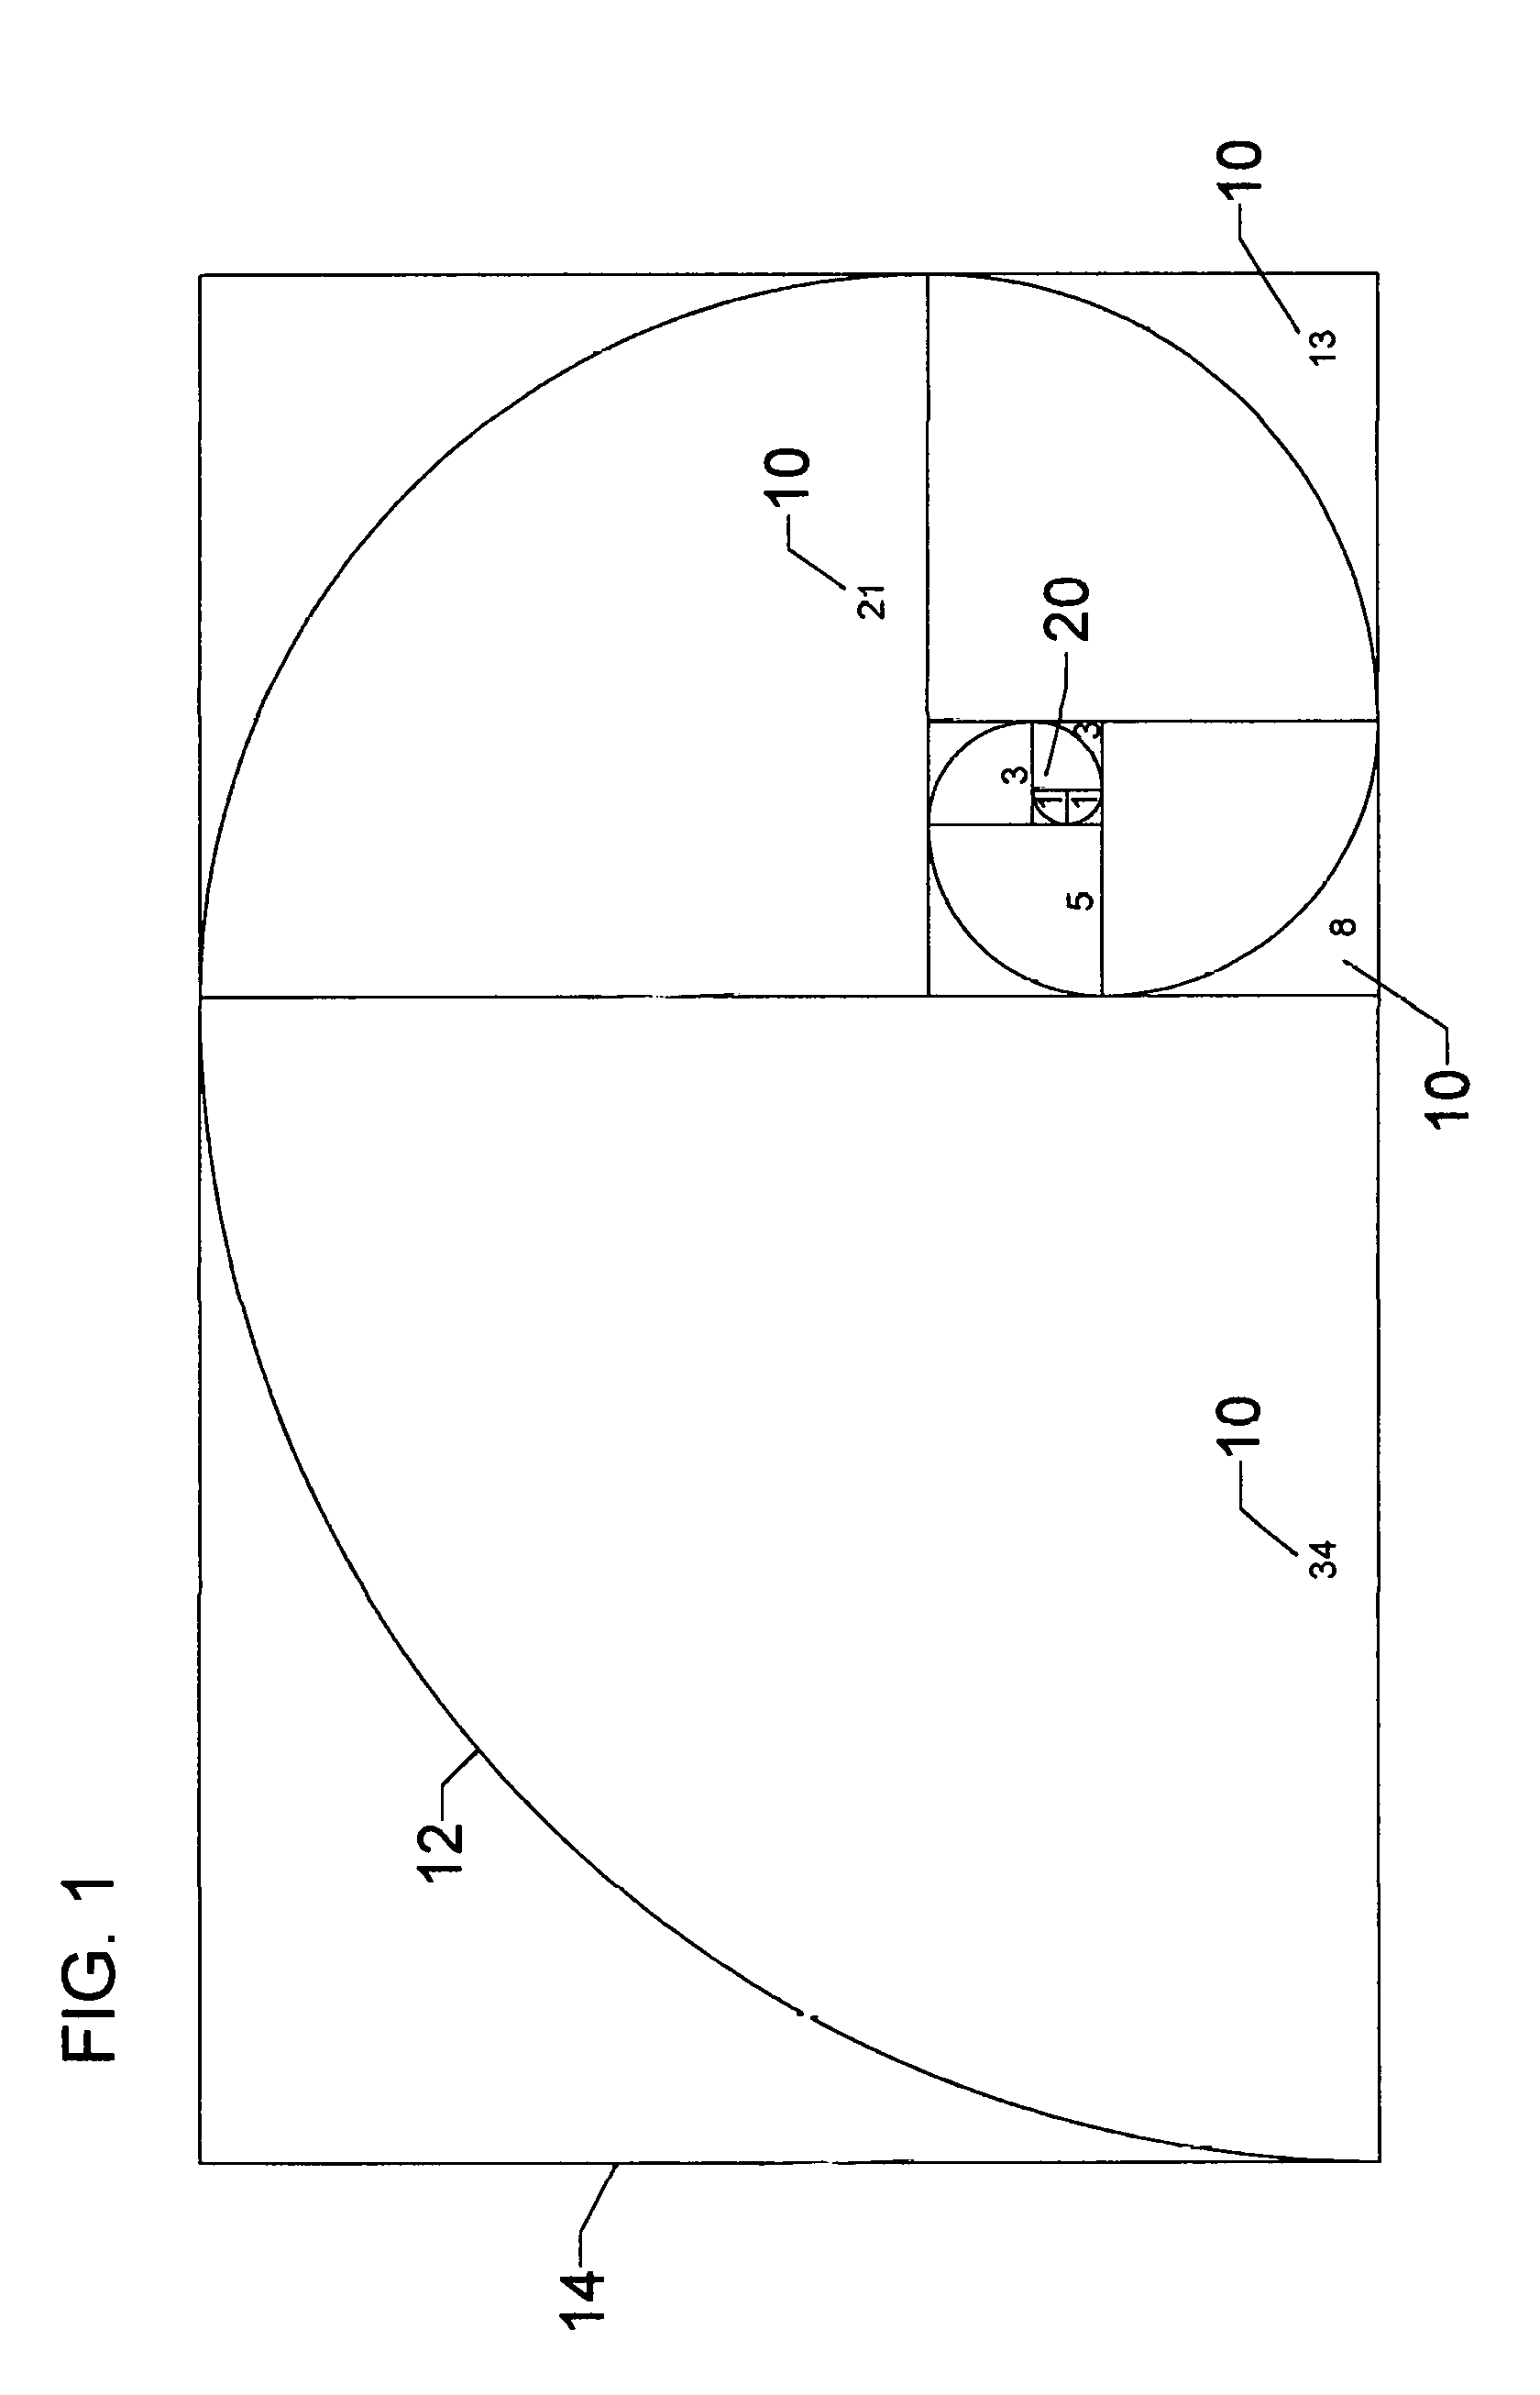 Apparatus and method for training plants